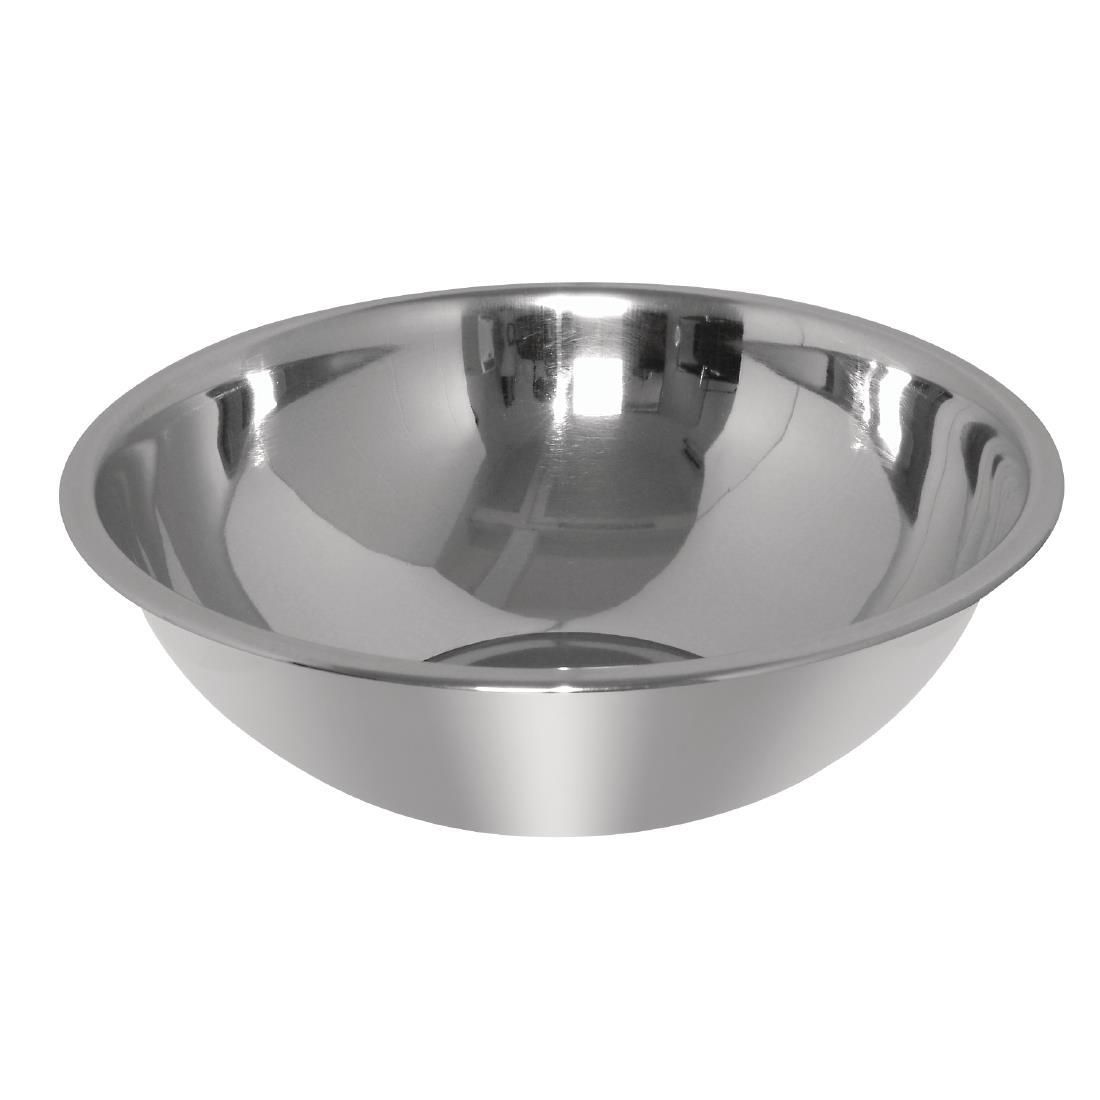 Vogue Stainless Steel Mixing Bowl 4.8Ltr - GC138  - 1